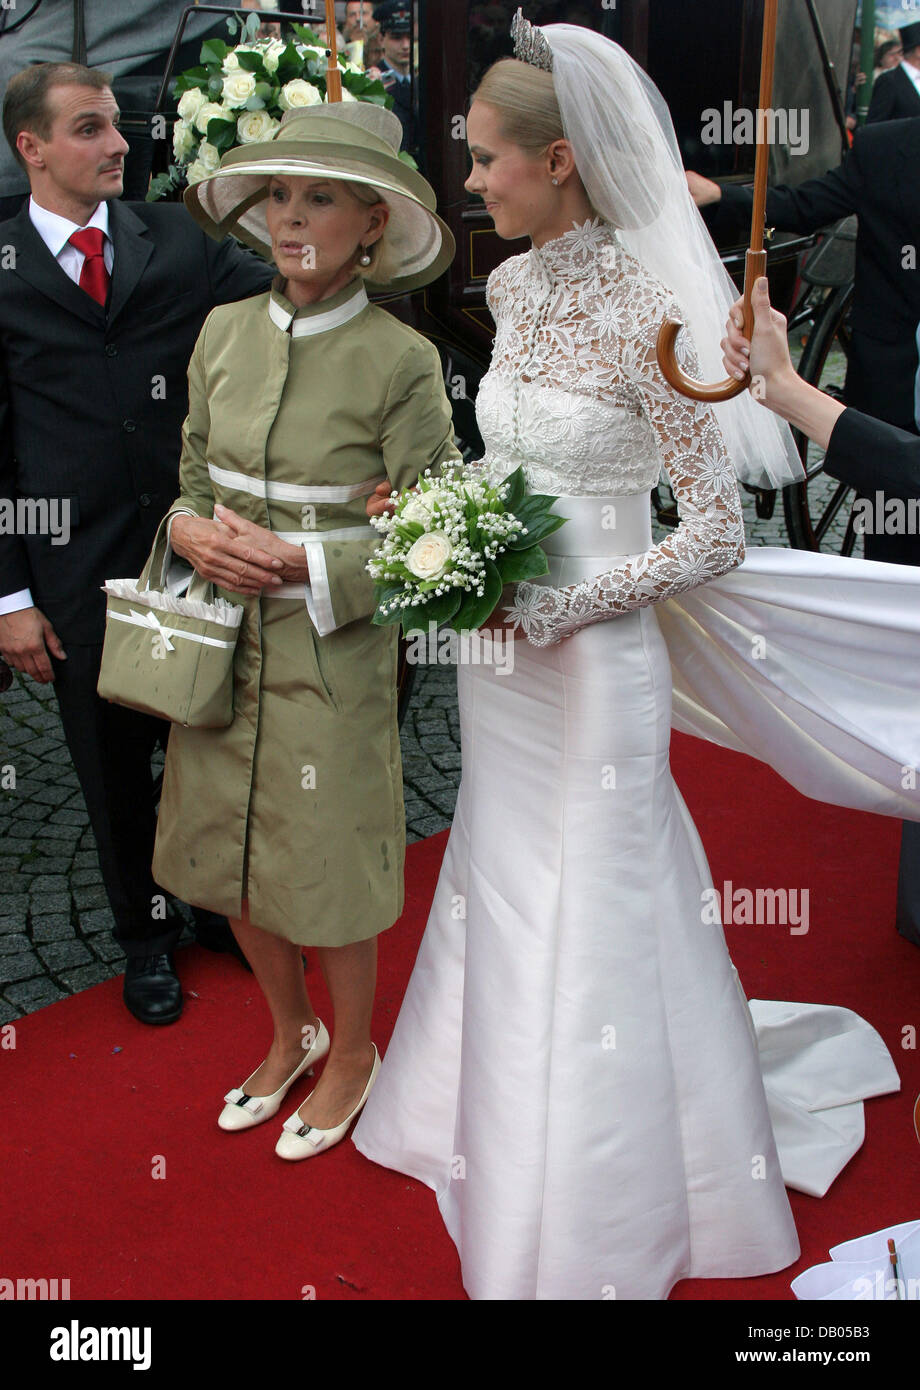 Bride Nadja Anna, Princess of Schaumburg-Lippe (R), is pictured with her mother Eleonore Zsoeks before her church wedding in Bueckeburg, Germany, 30 June 2007. Politicians, royals and celebrities were among the 750 invited guests. Photo: Albert Nieboer (NETHERLANDS OUT) Stock Photo